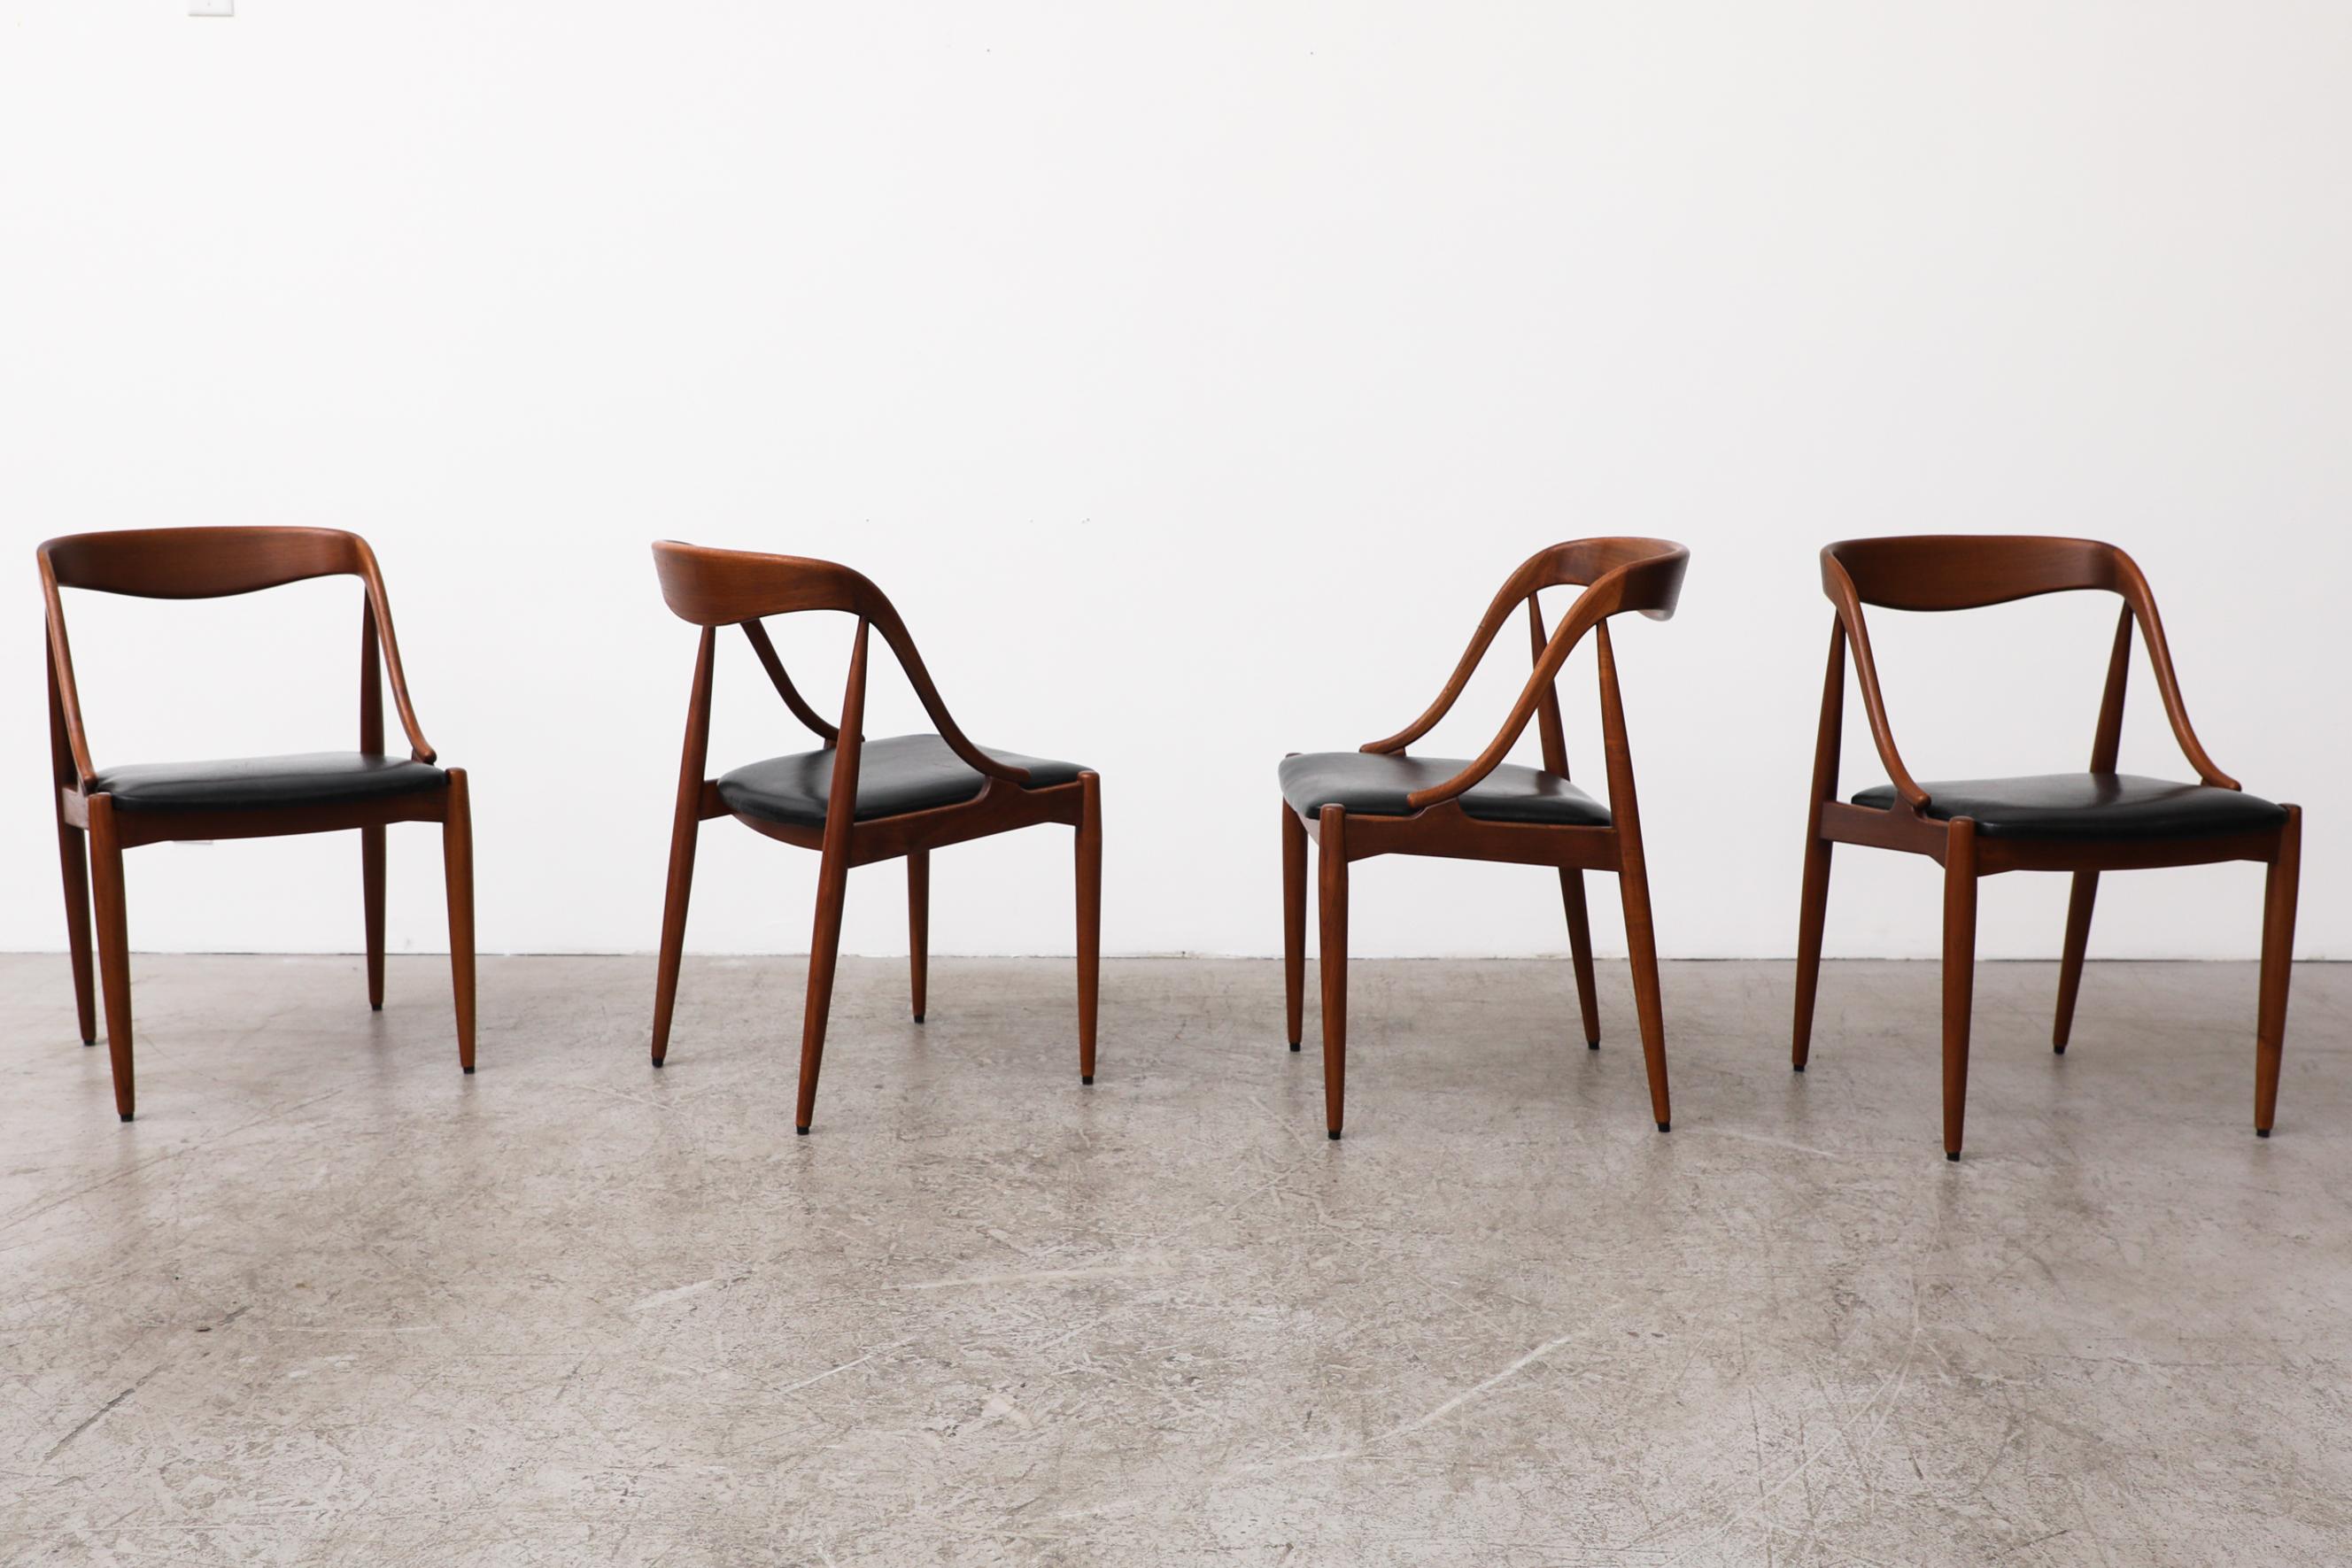 Mid-Century Danish Model 16 dining chairs by Johannes Andersen For Uldum Møbelfabrik, 1960s, set of 4. These chairs have original black leather seats with lightly refinished solid teak frames with a great patina. Wear is consistent with their age